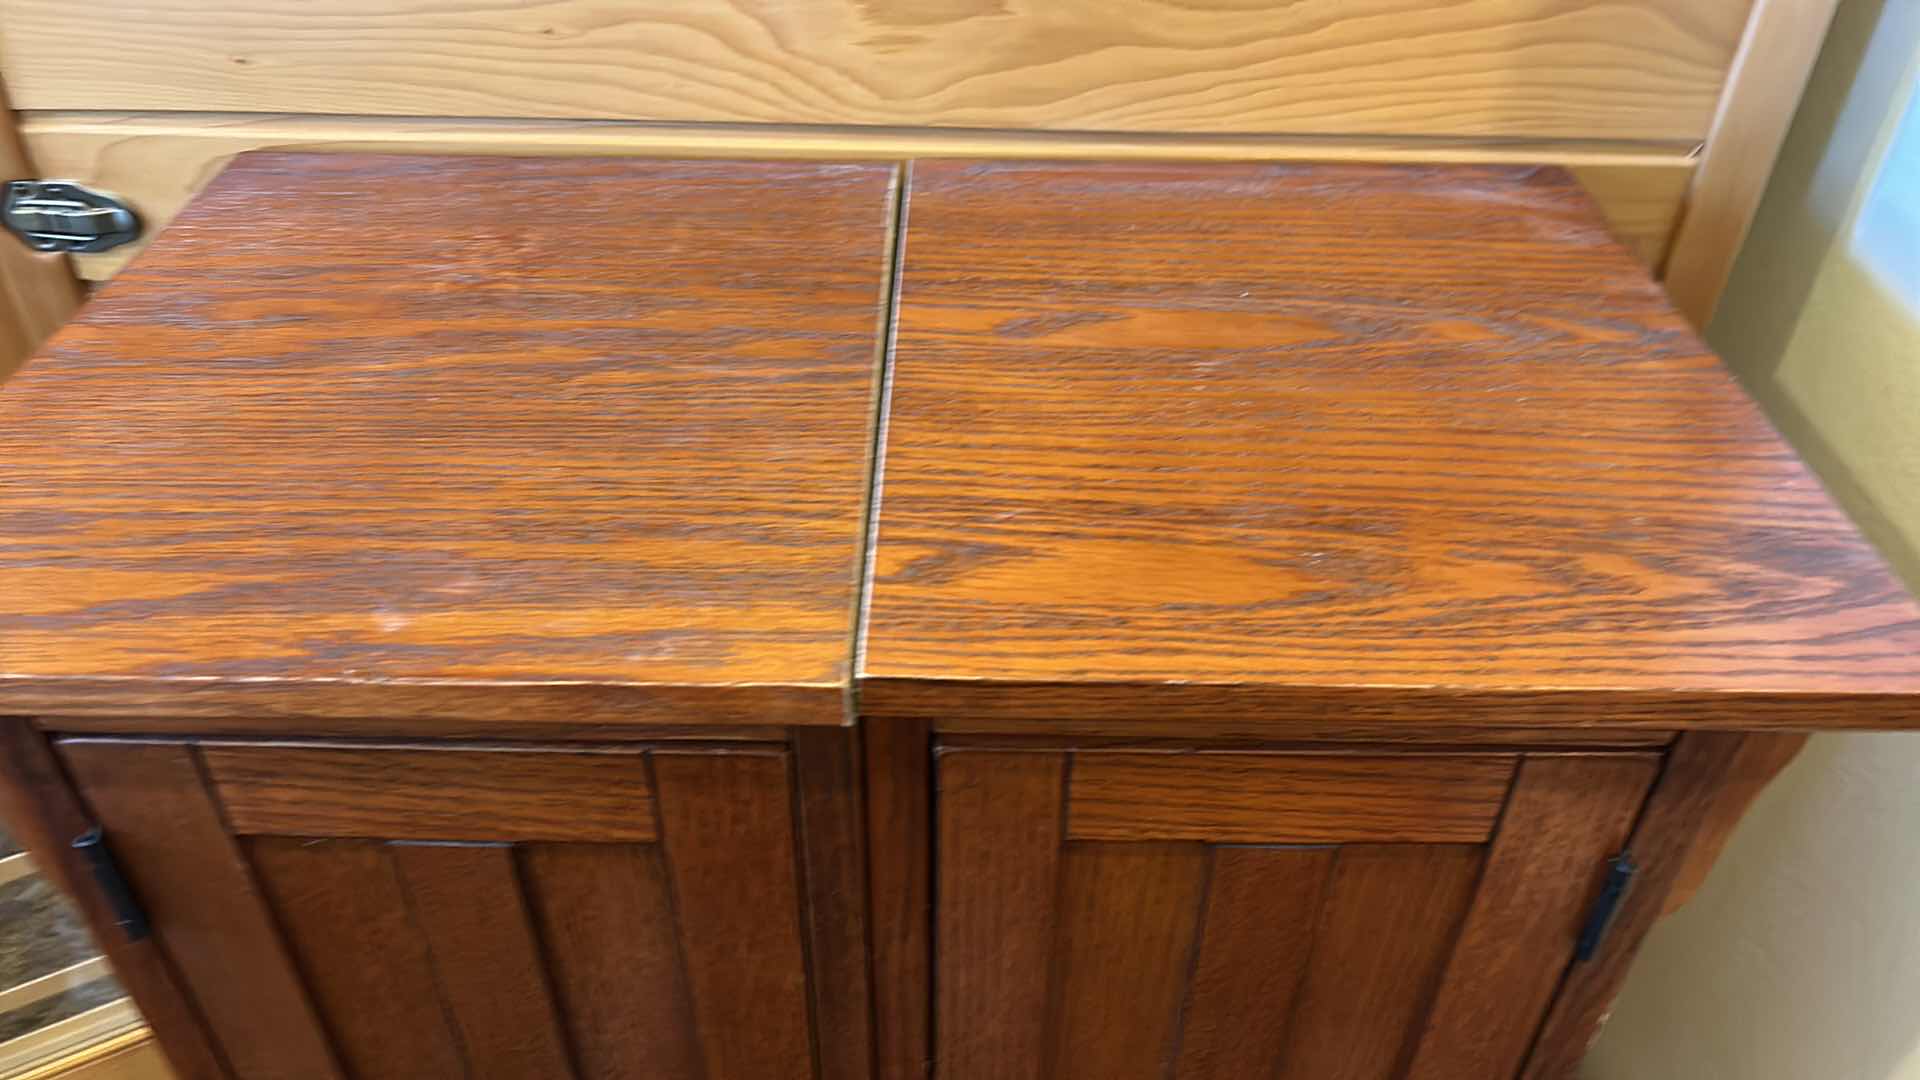 Photo 2 of 2 SIDE BY SIDE WOOD CABINETS W CONTENTS 
20 25 1/2“ x 15“ x 41 1/2“